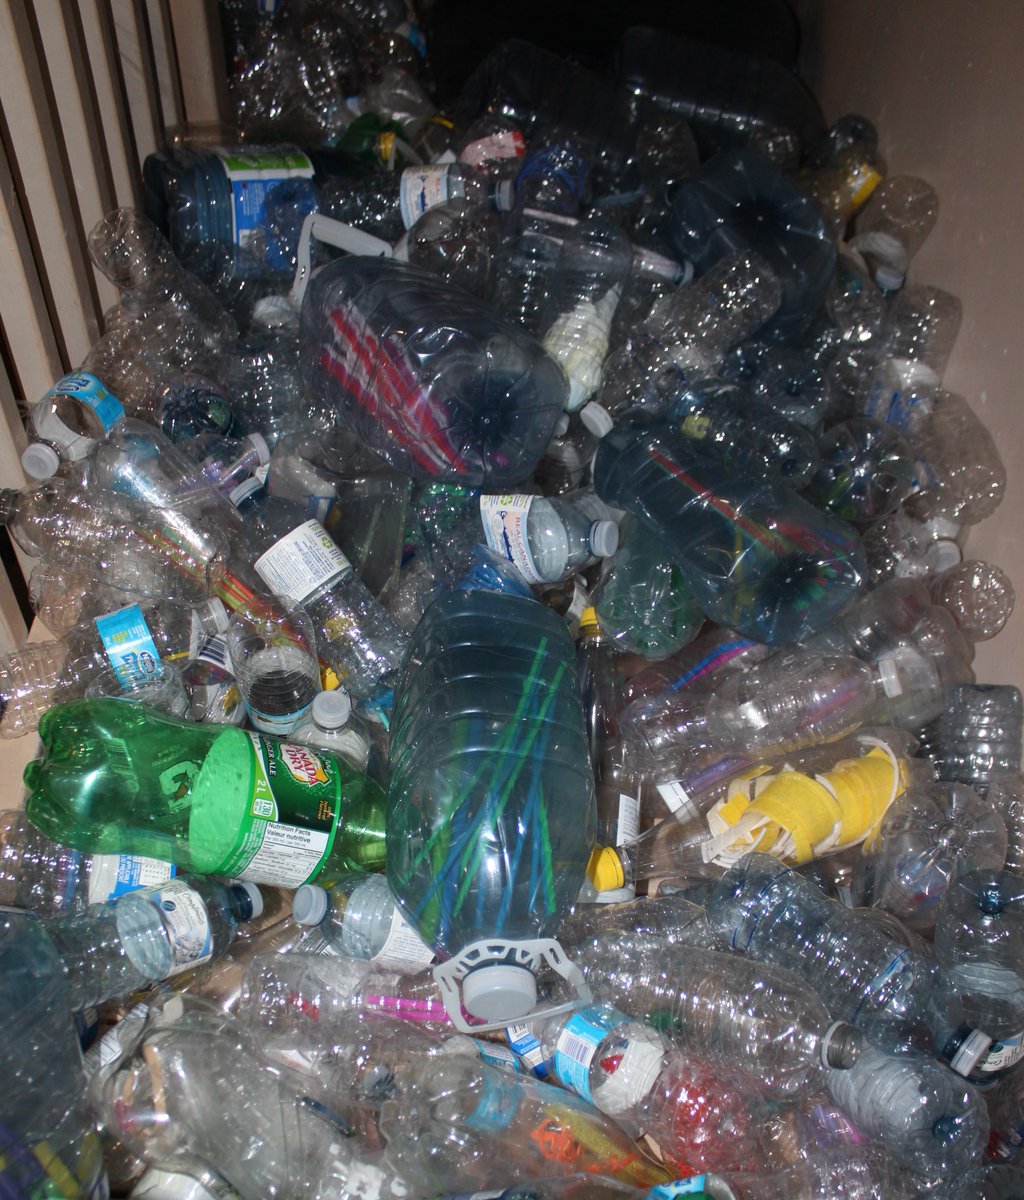 IntensifyingPlasticWorlds How does inviting hundreds of plastic bottles into the early childhood classroom disrupt neoliberal & neocolonial everyday processes of plastic waste(ing)? #livingwithplastic @DiscardStudies #Discard2020 @vpacinik @common_worlds 1/10